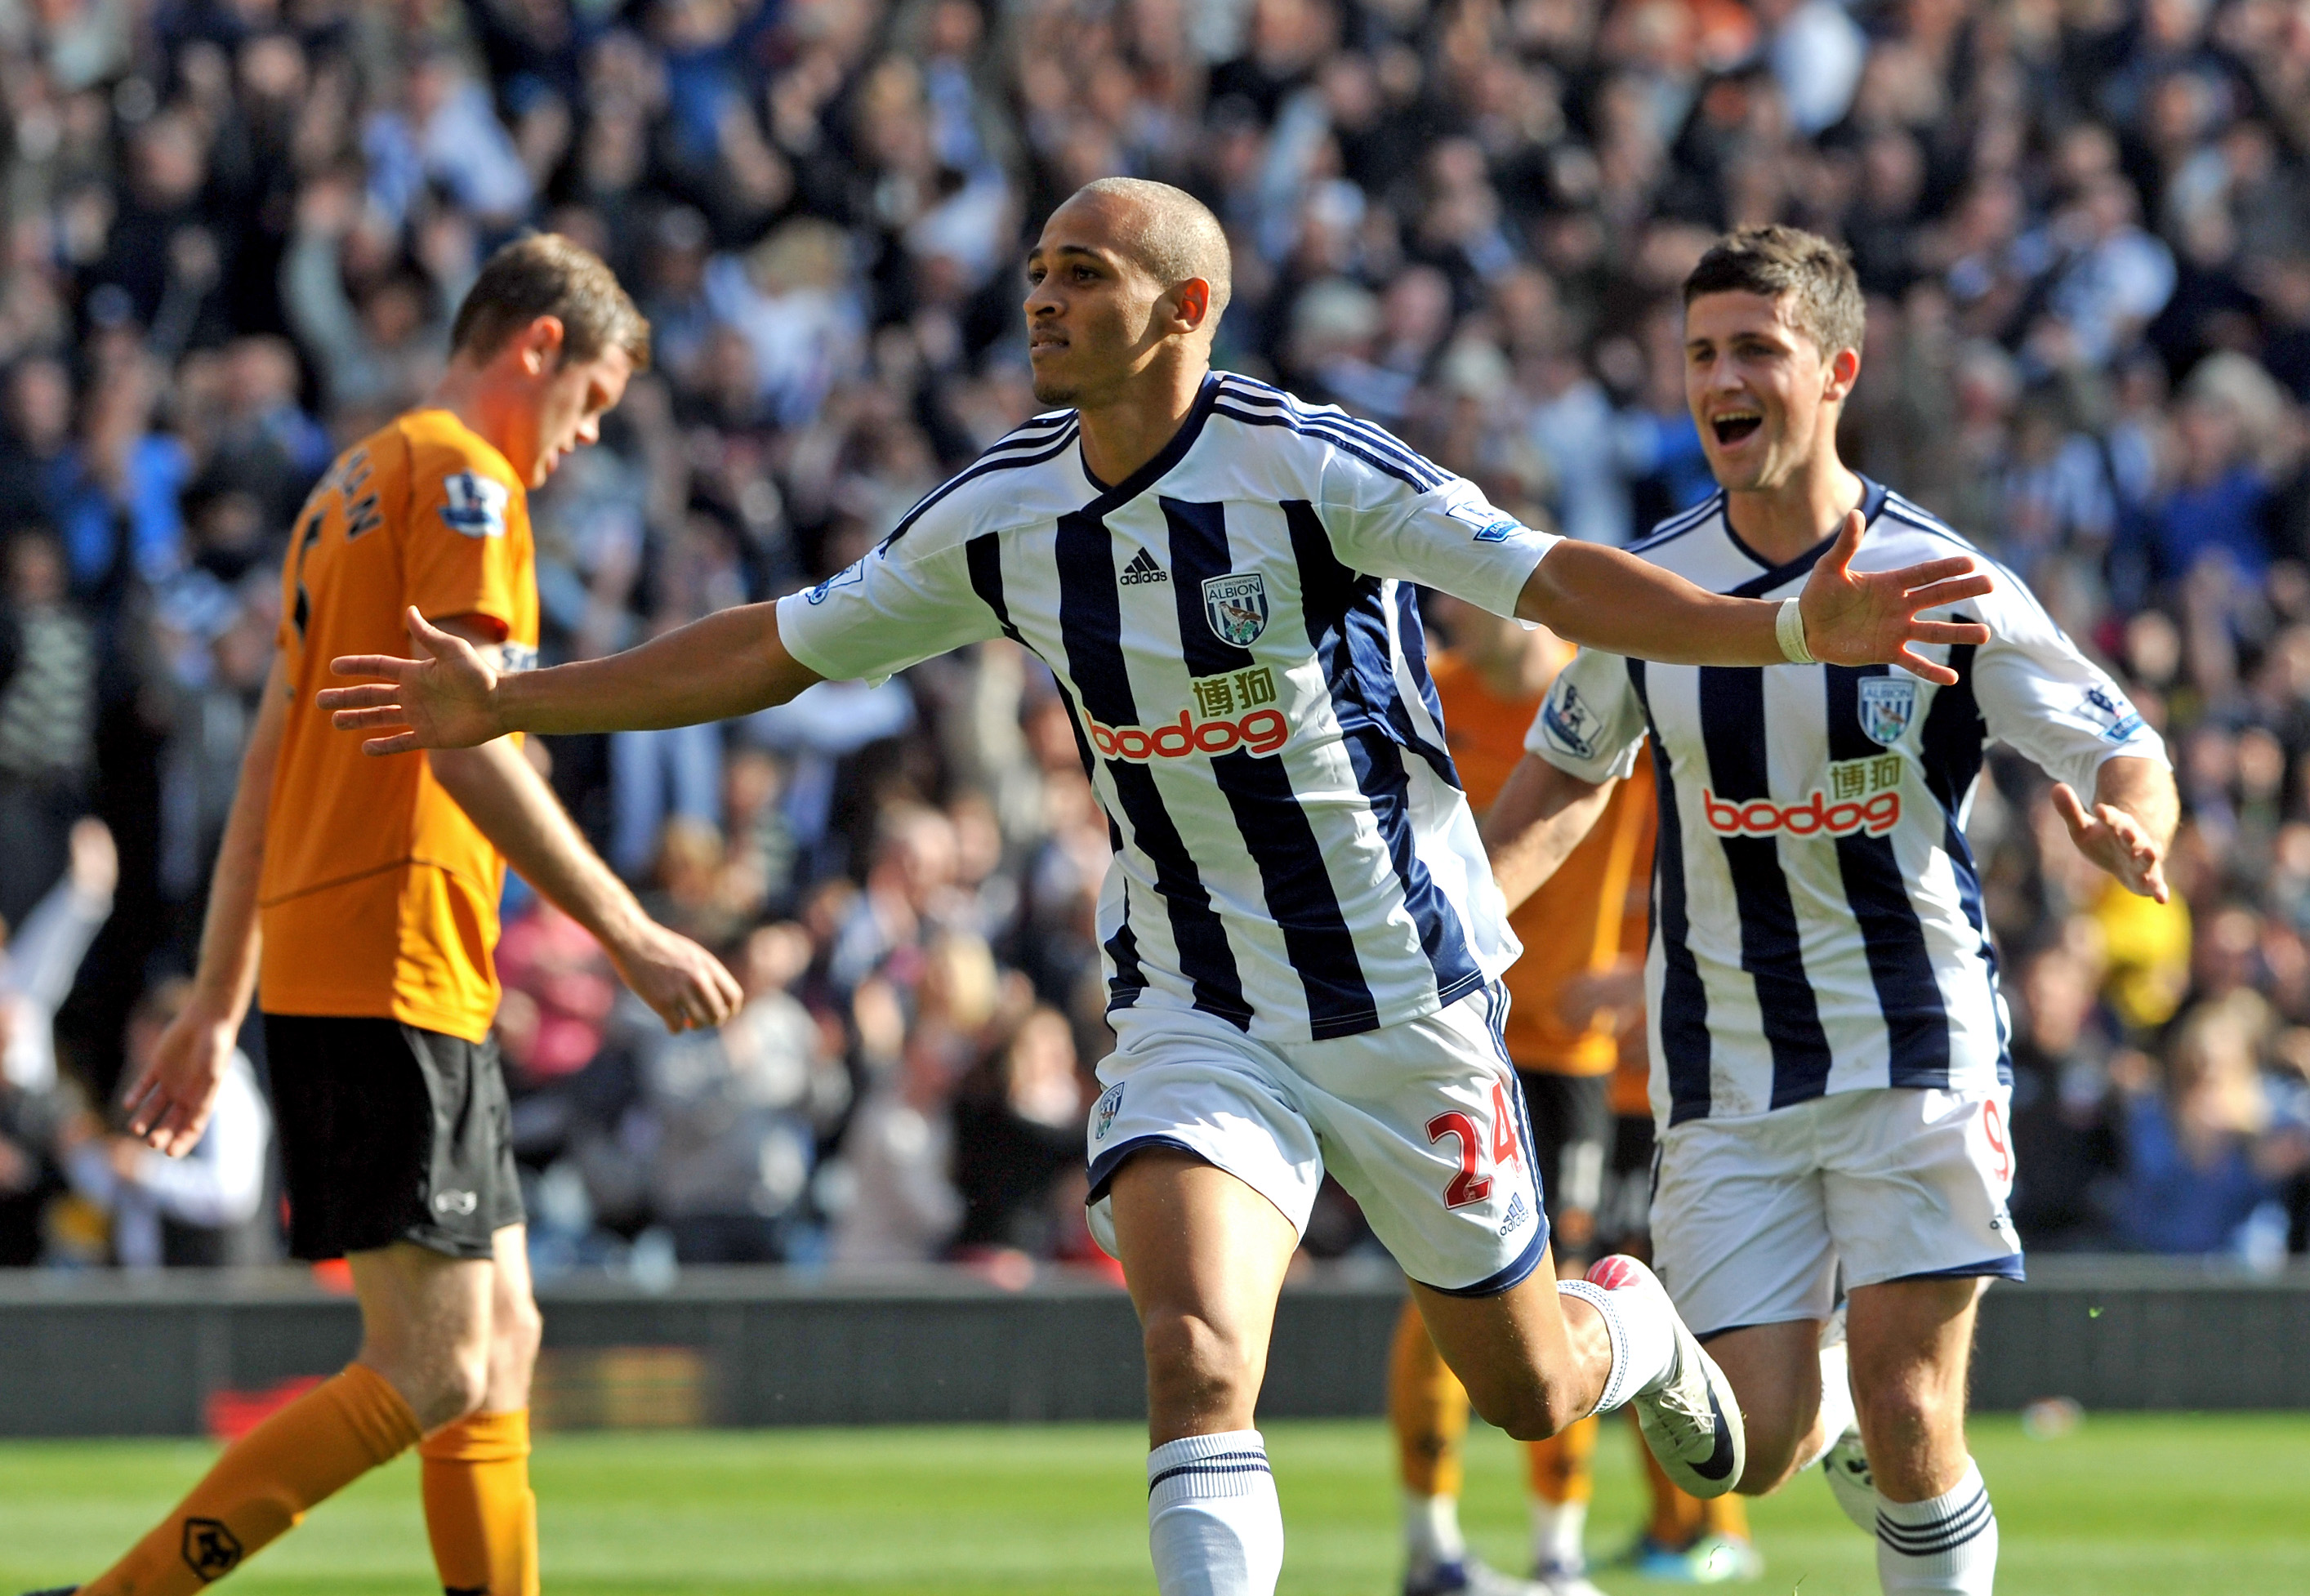 Peter Odemwingie celebrates scoring against Wolves at The Hawthorns in 2011